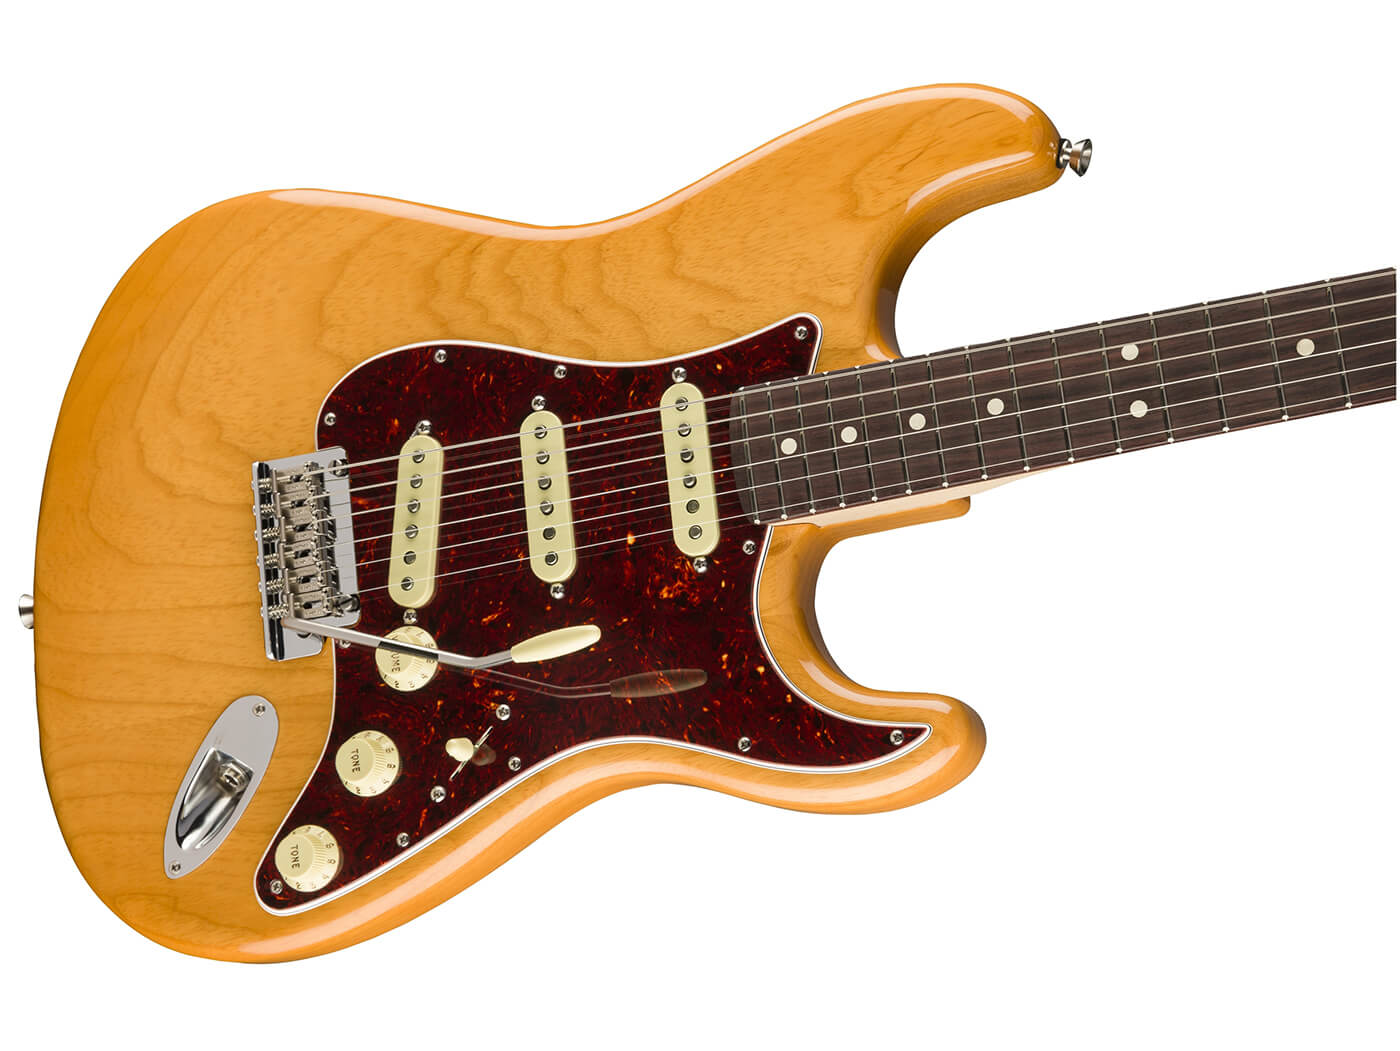 Fender Limited Edition: What's the Story?